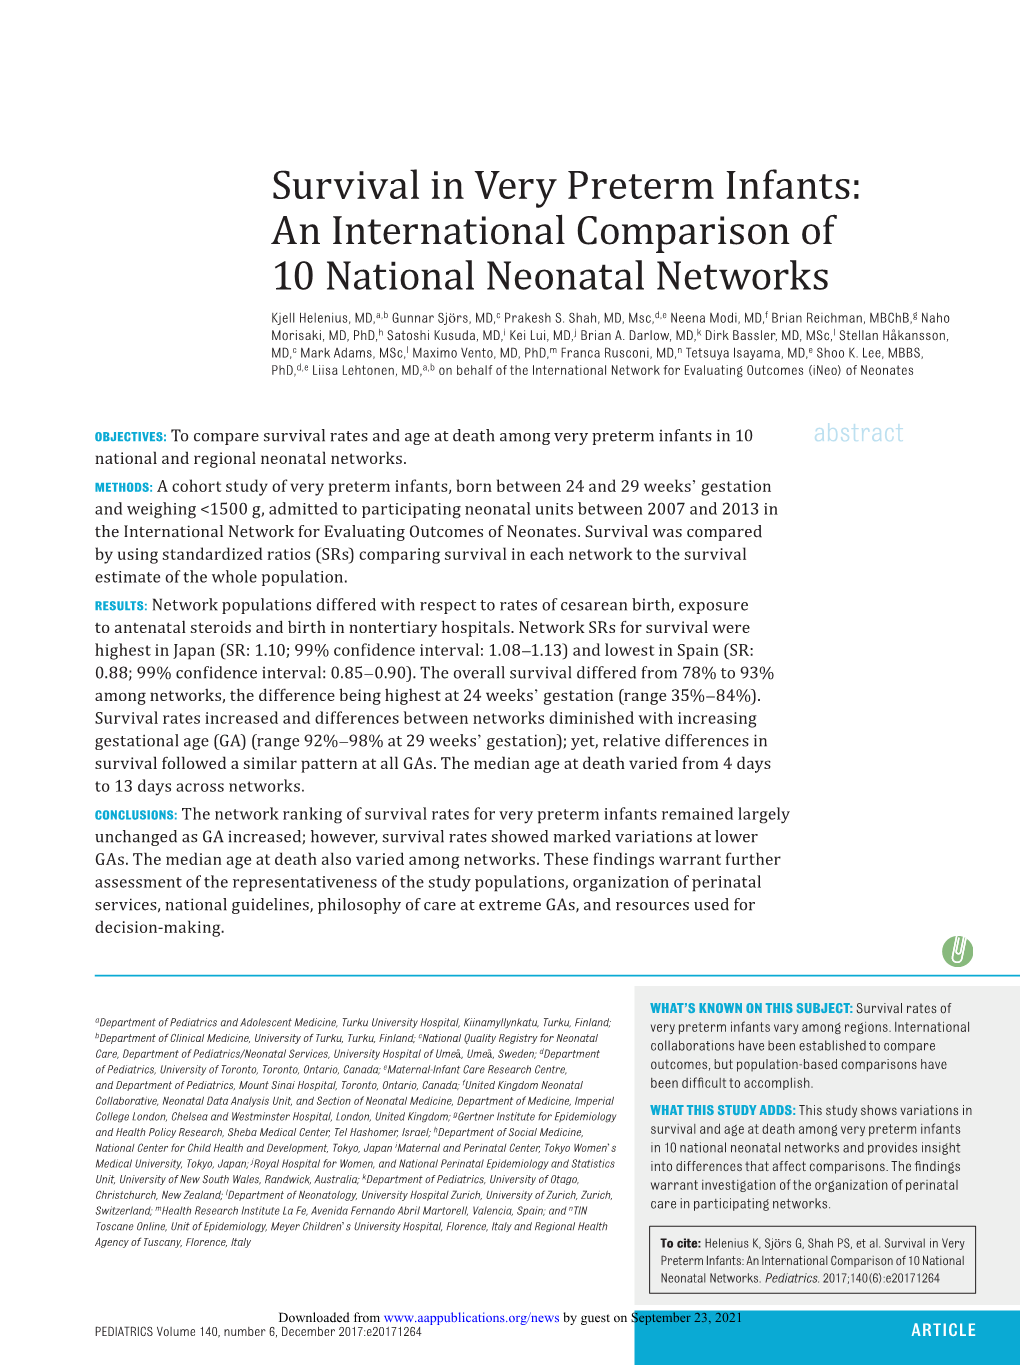 Survival in Very Preterm Infants: an International Comparison of 10 National Neonatal Networks